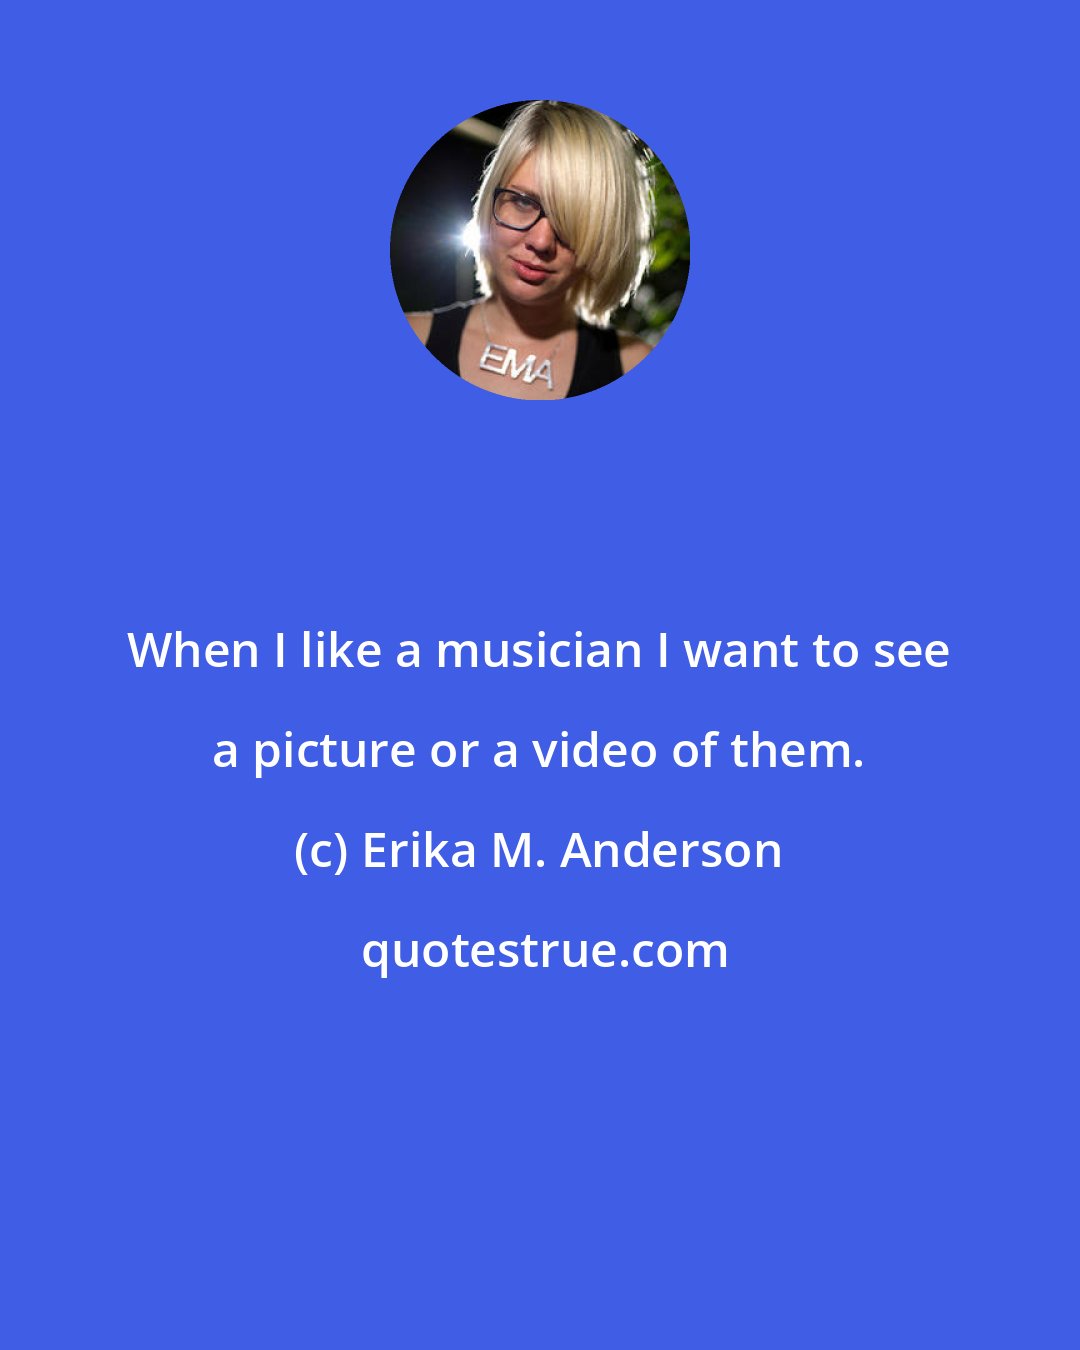 Erika M. Anderson: When I like a musician I want to see a picture or a video of them.